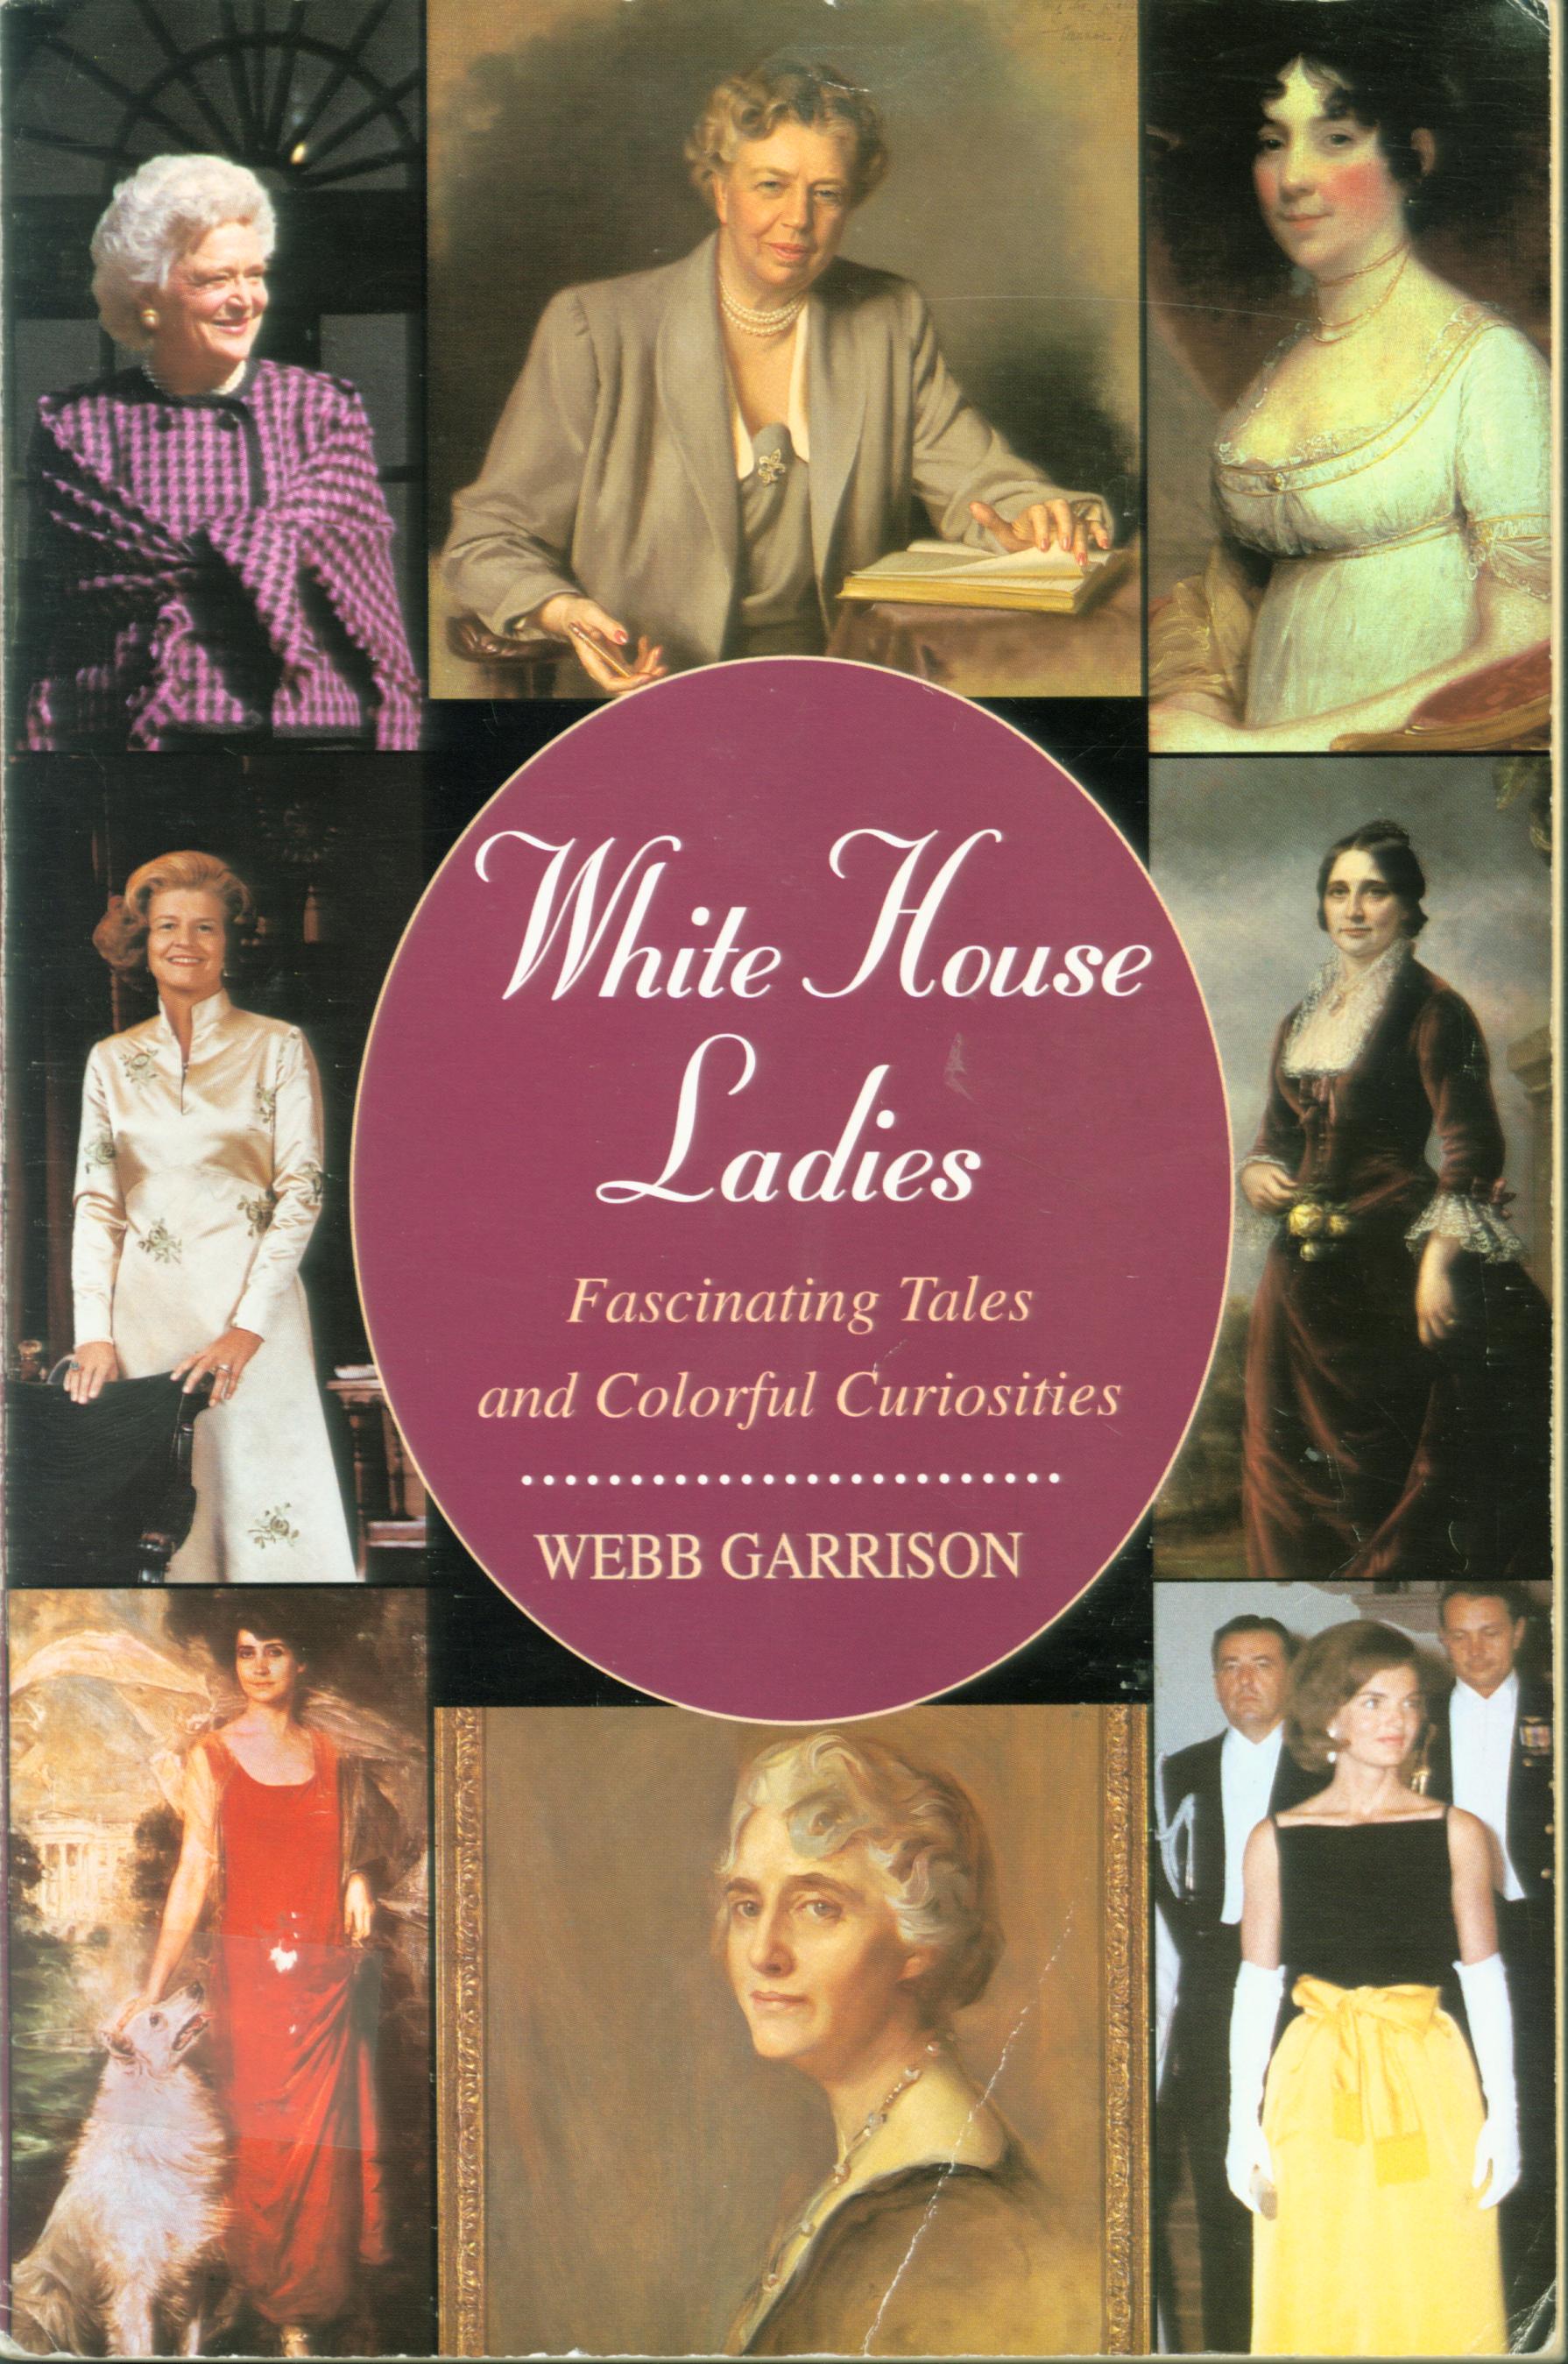 WHITE HOUSE LADIES: fascinating tales and colorful curiosities. 